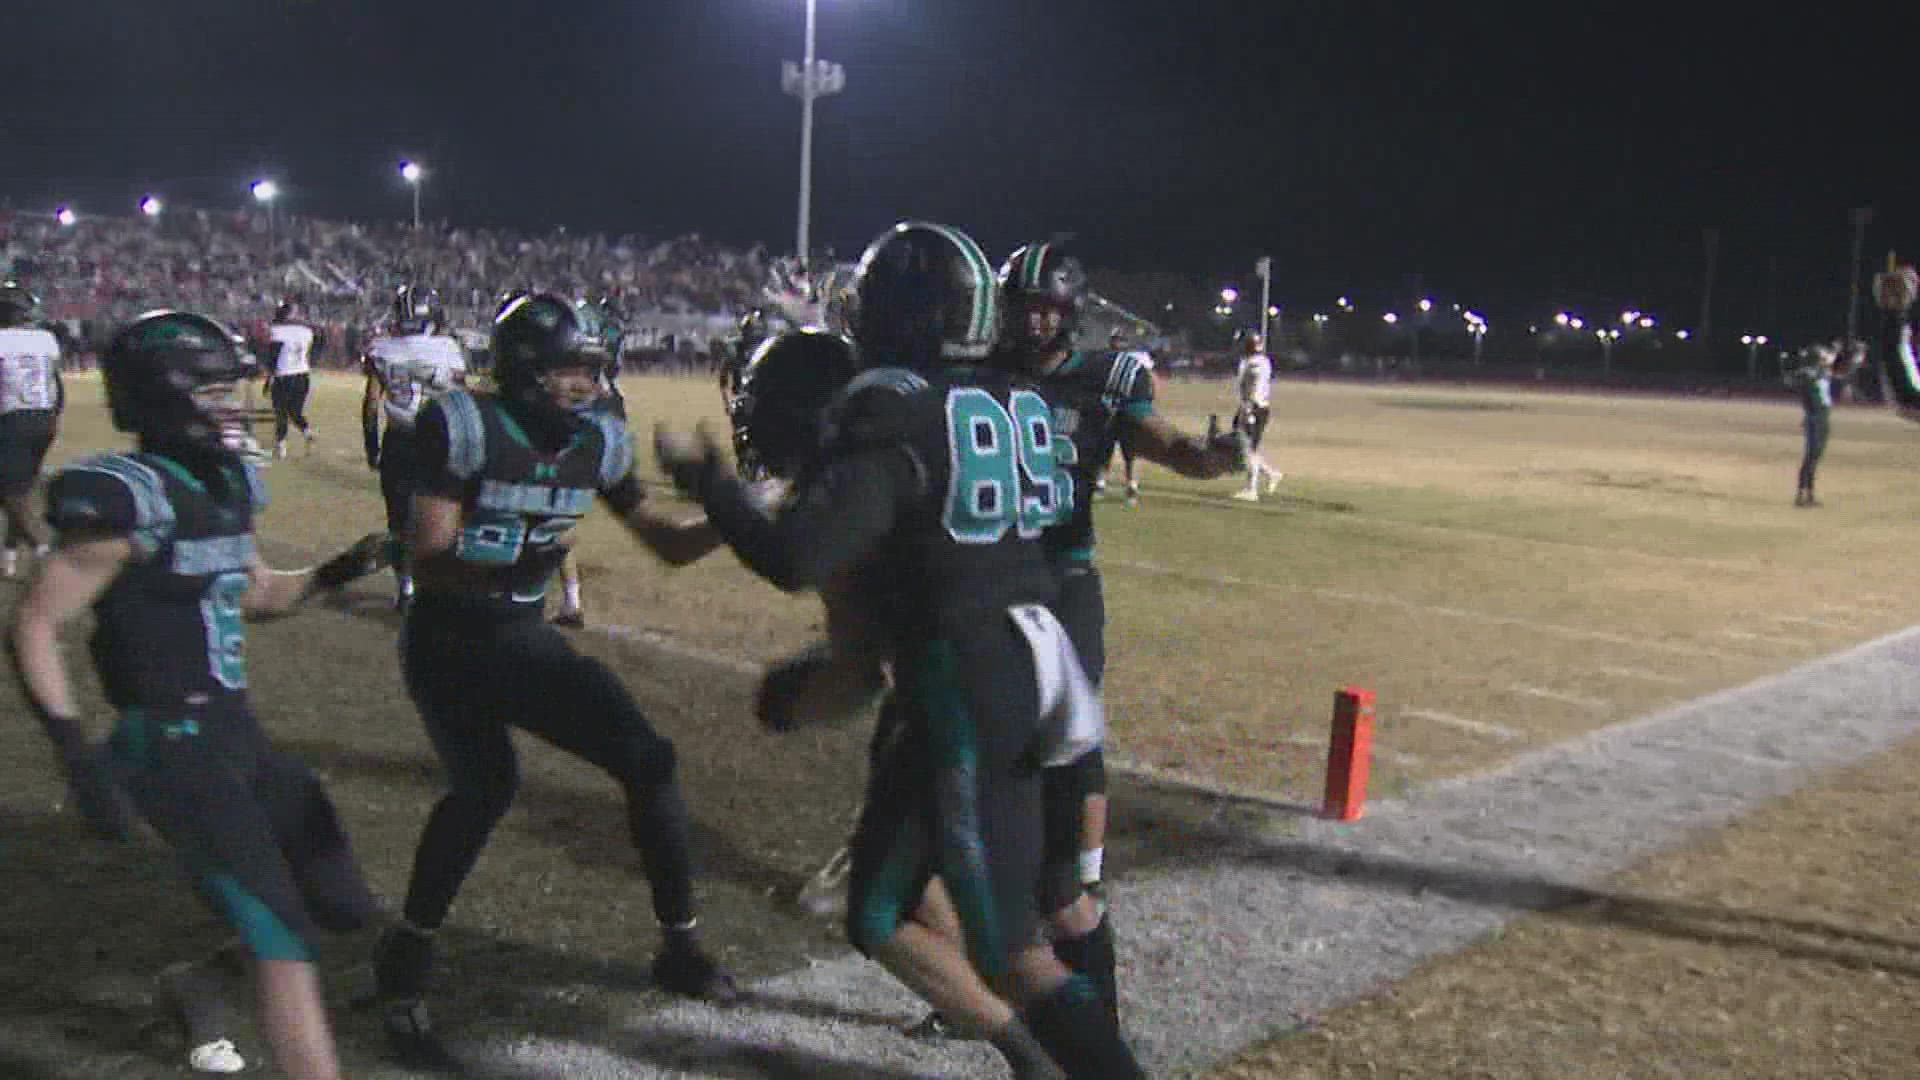 The Hawks are making a trip back to the 6A state title game with a win over Red Mountain.